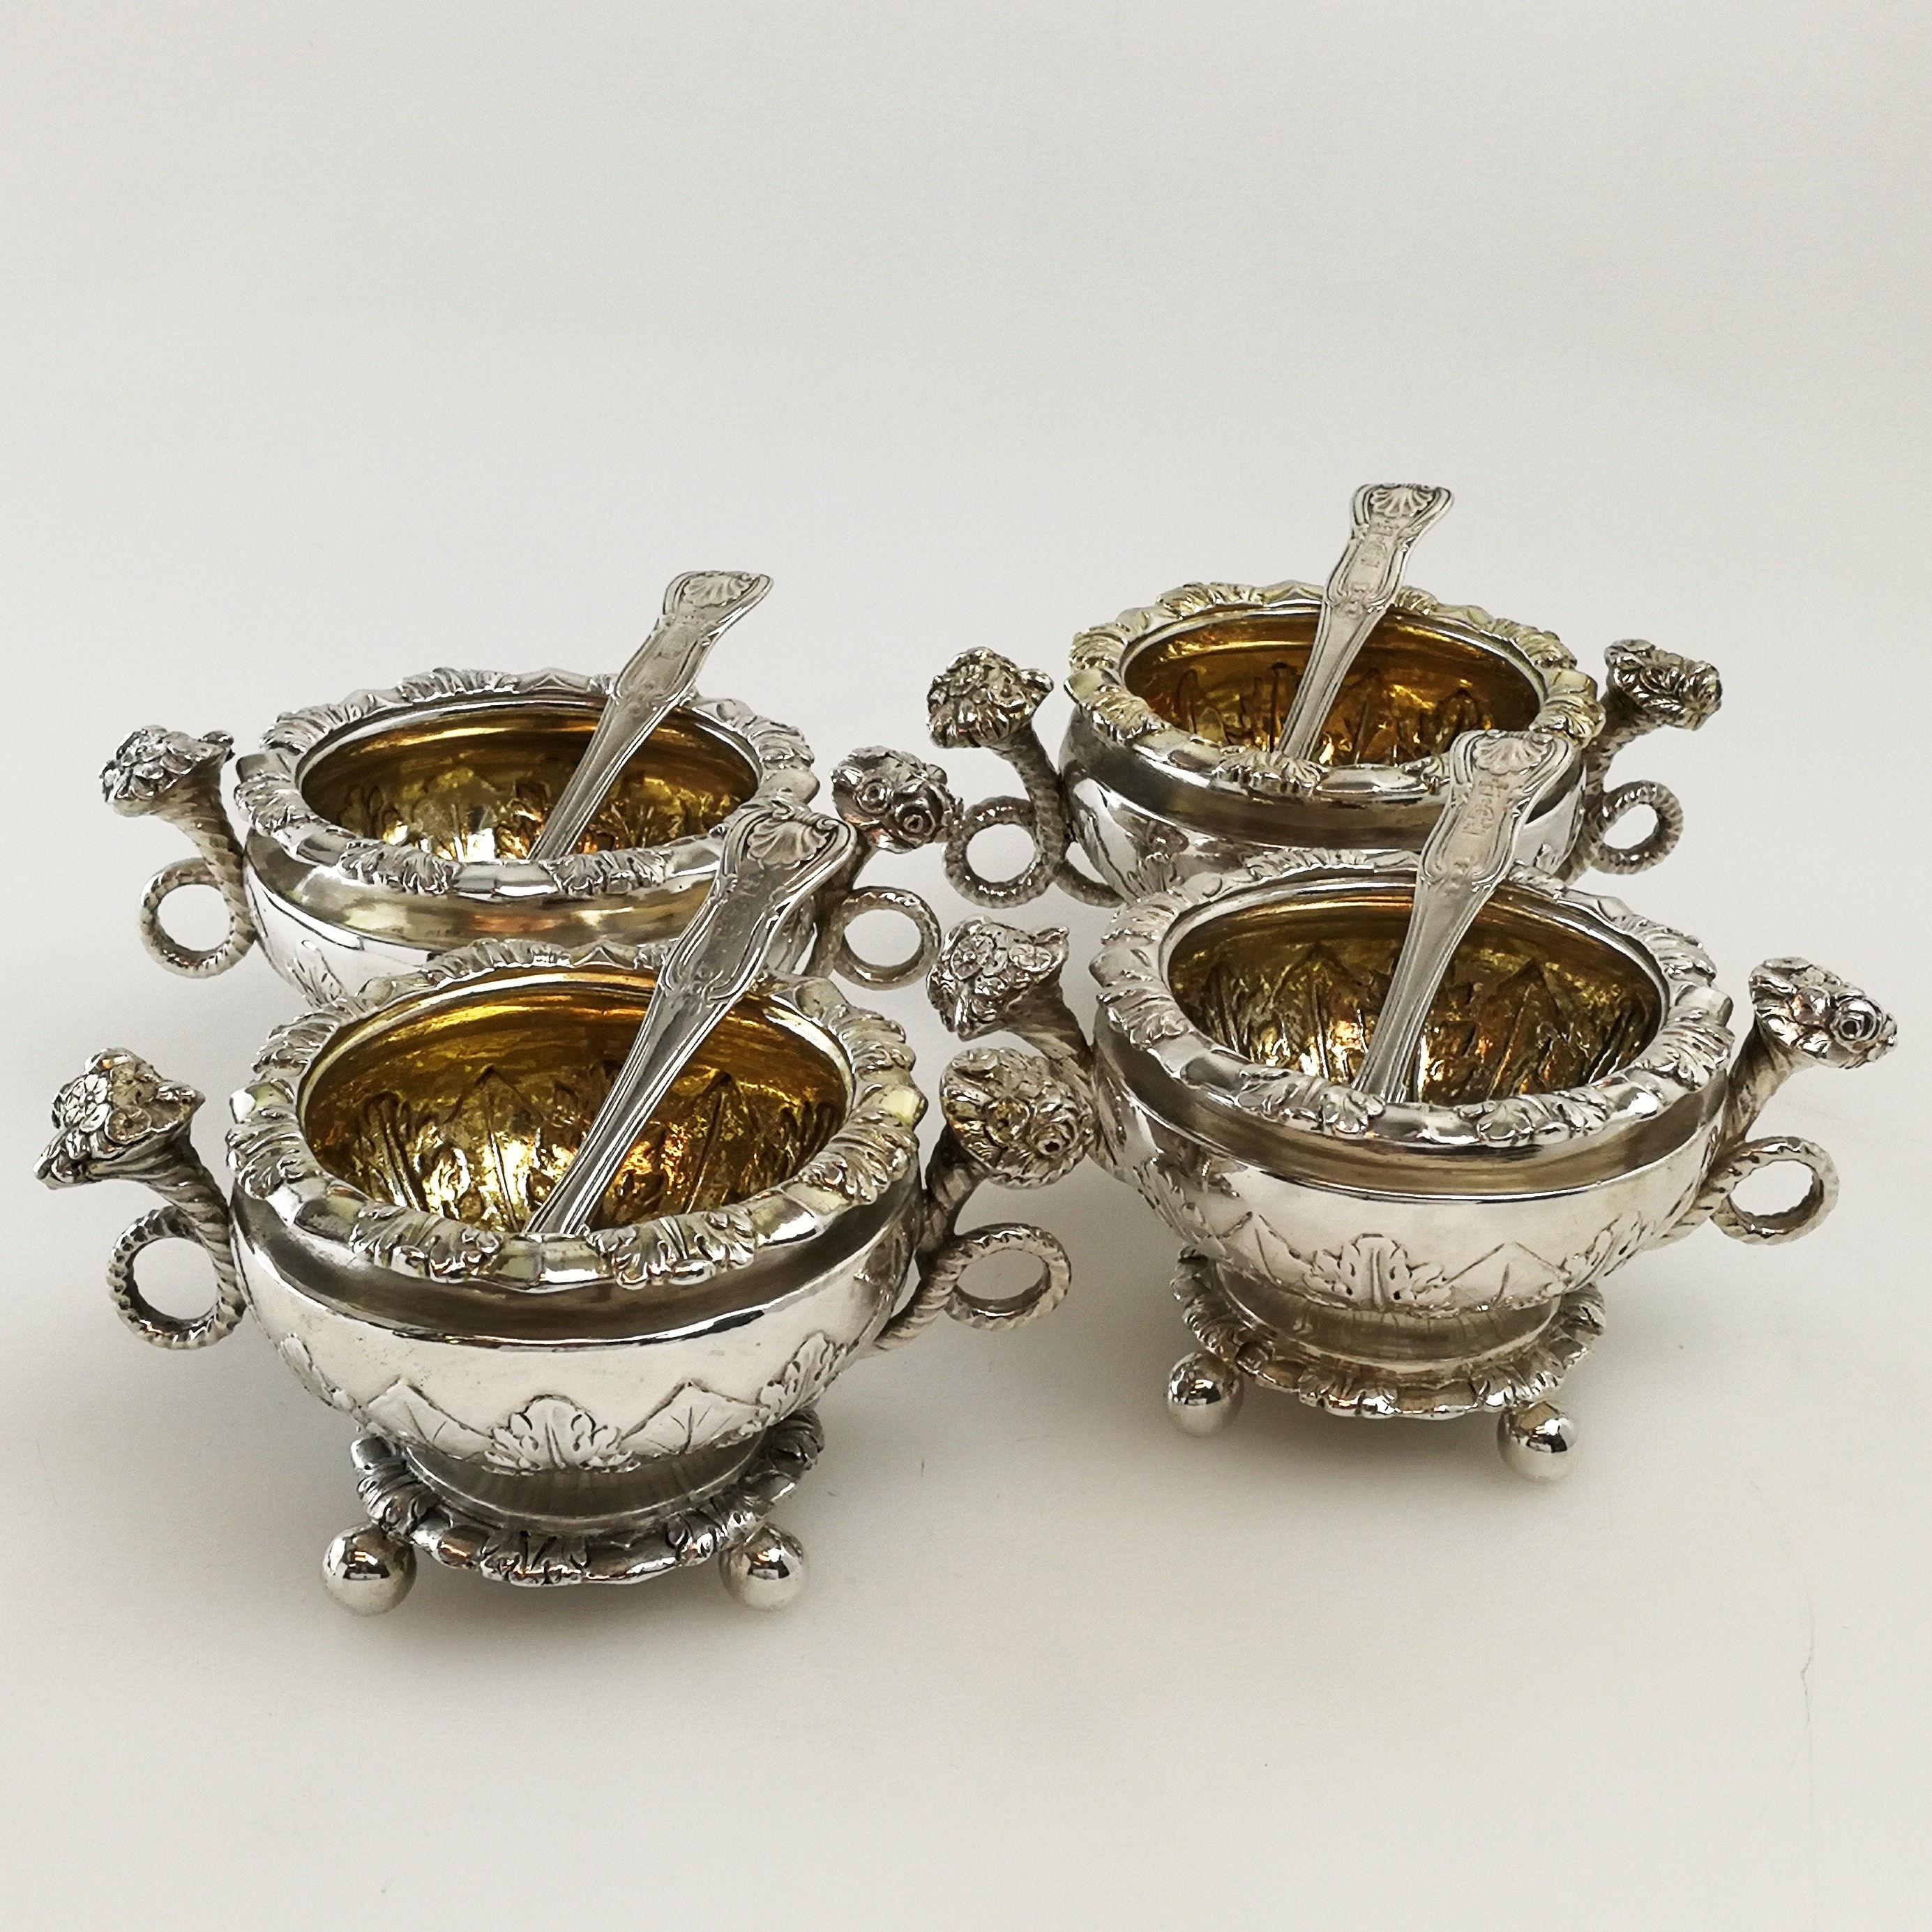 A set of four beautiful Antique Georgian solid Silver Salts. This matched Condiment Set features an elegant chased leaf / foliate design on the body and rim of each Salt. Each salt dish stands on four ball feet and each has a pair of ornate handle